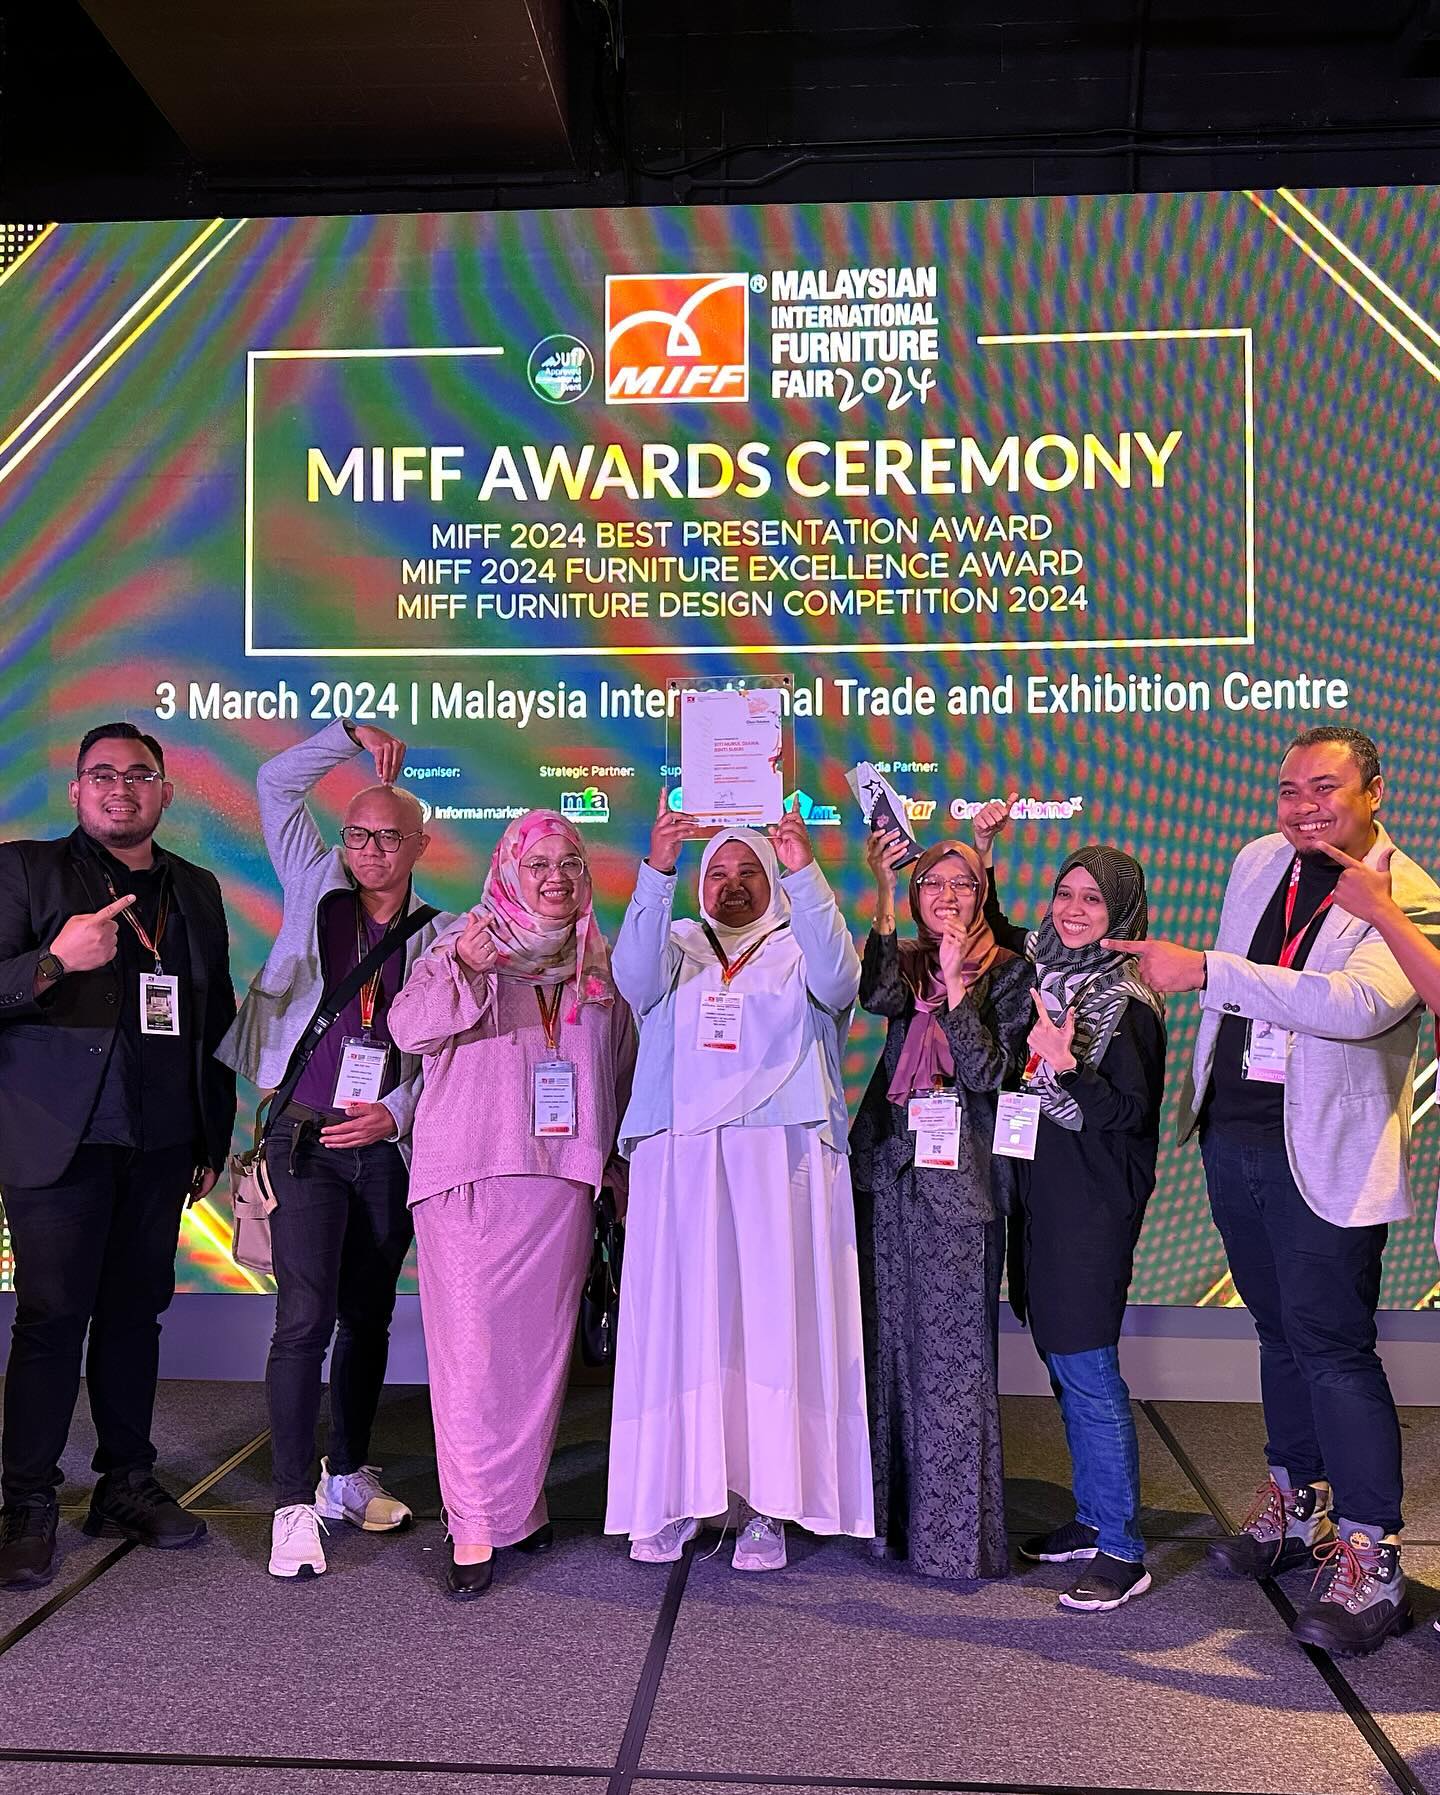 MIFF Awards Ceremony – MIFF Furniture Design Competition 2024